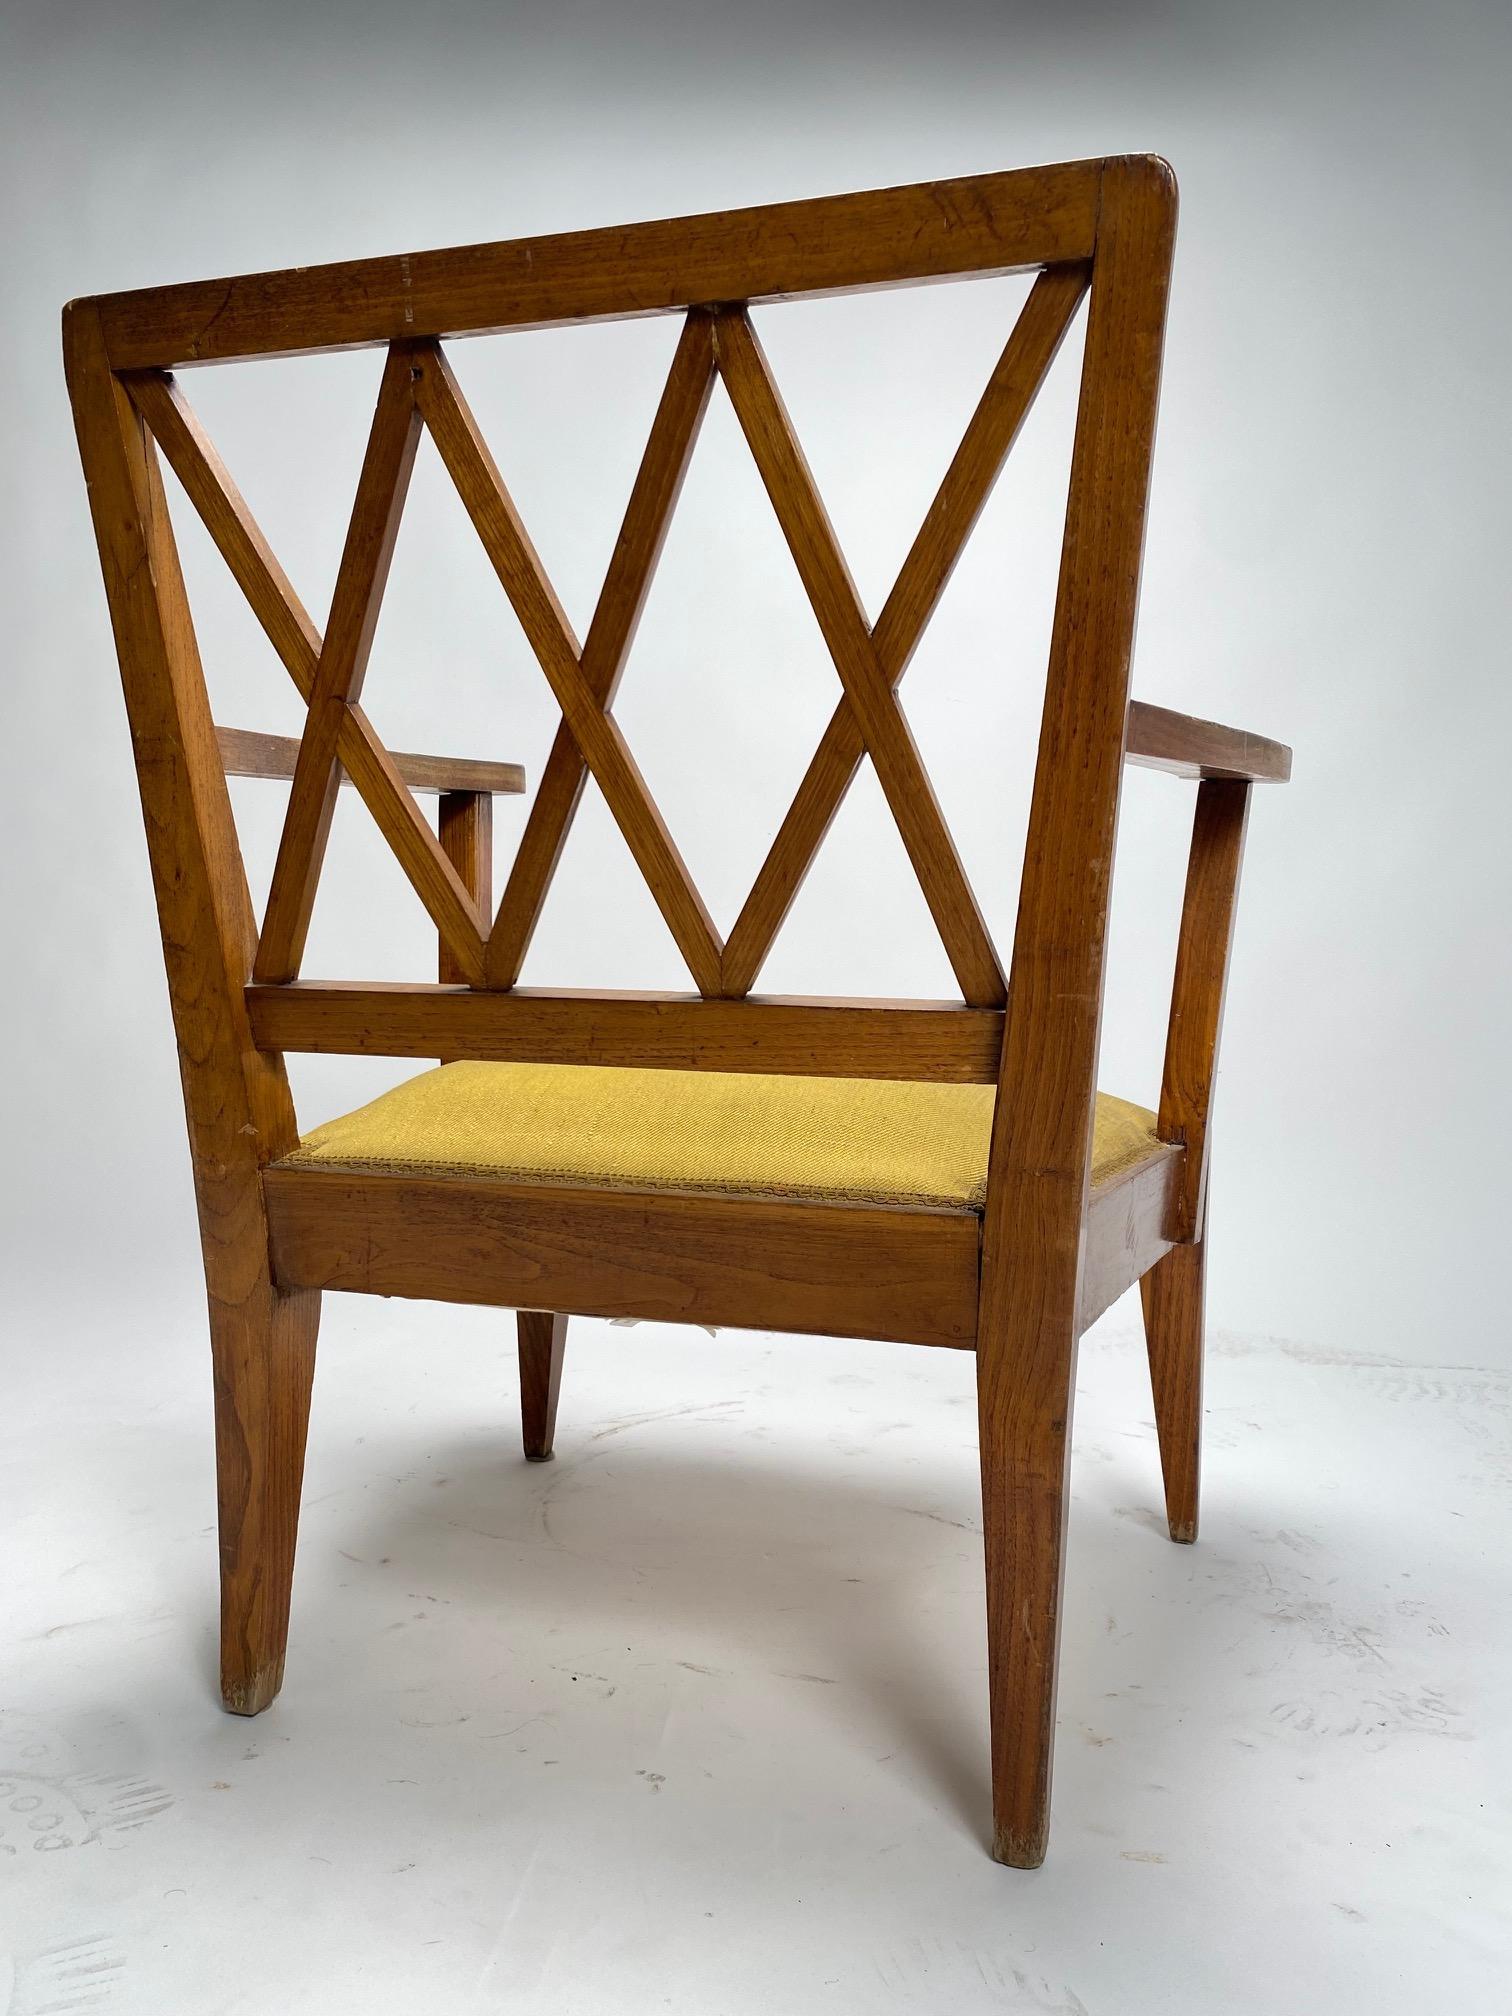 Mid-20th Century Sculptural wooden Armchair, Gio Ponti Style, Italy, 1930s For Sale